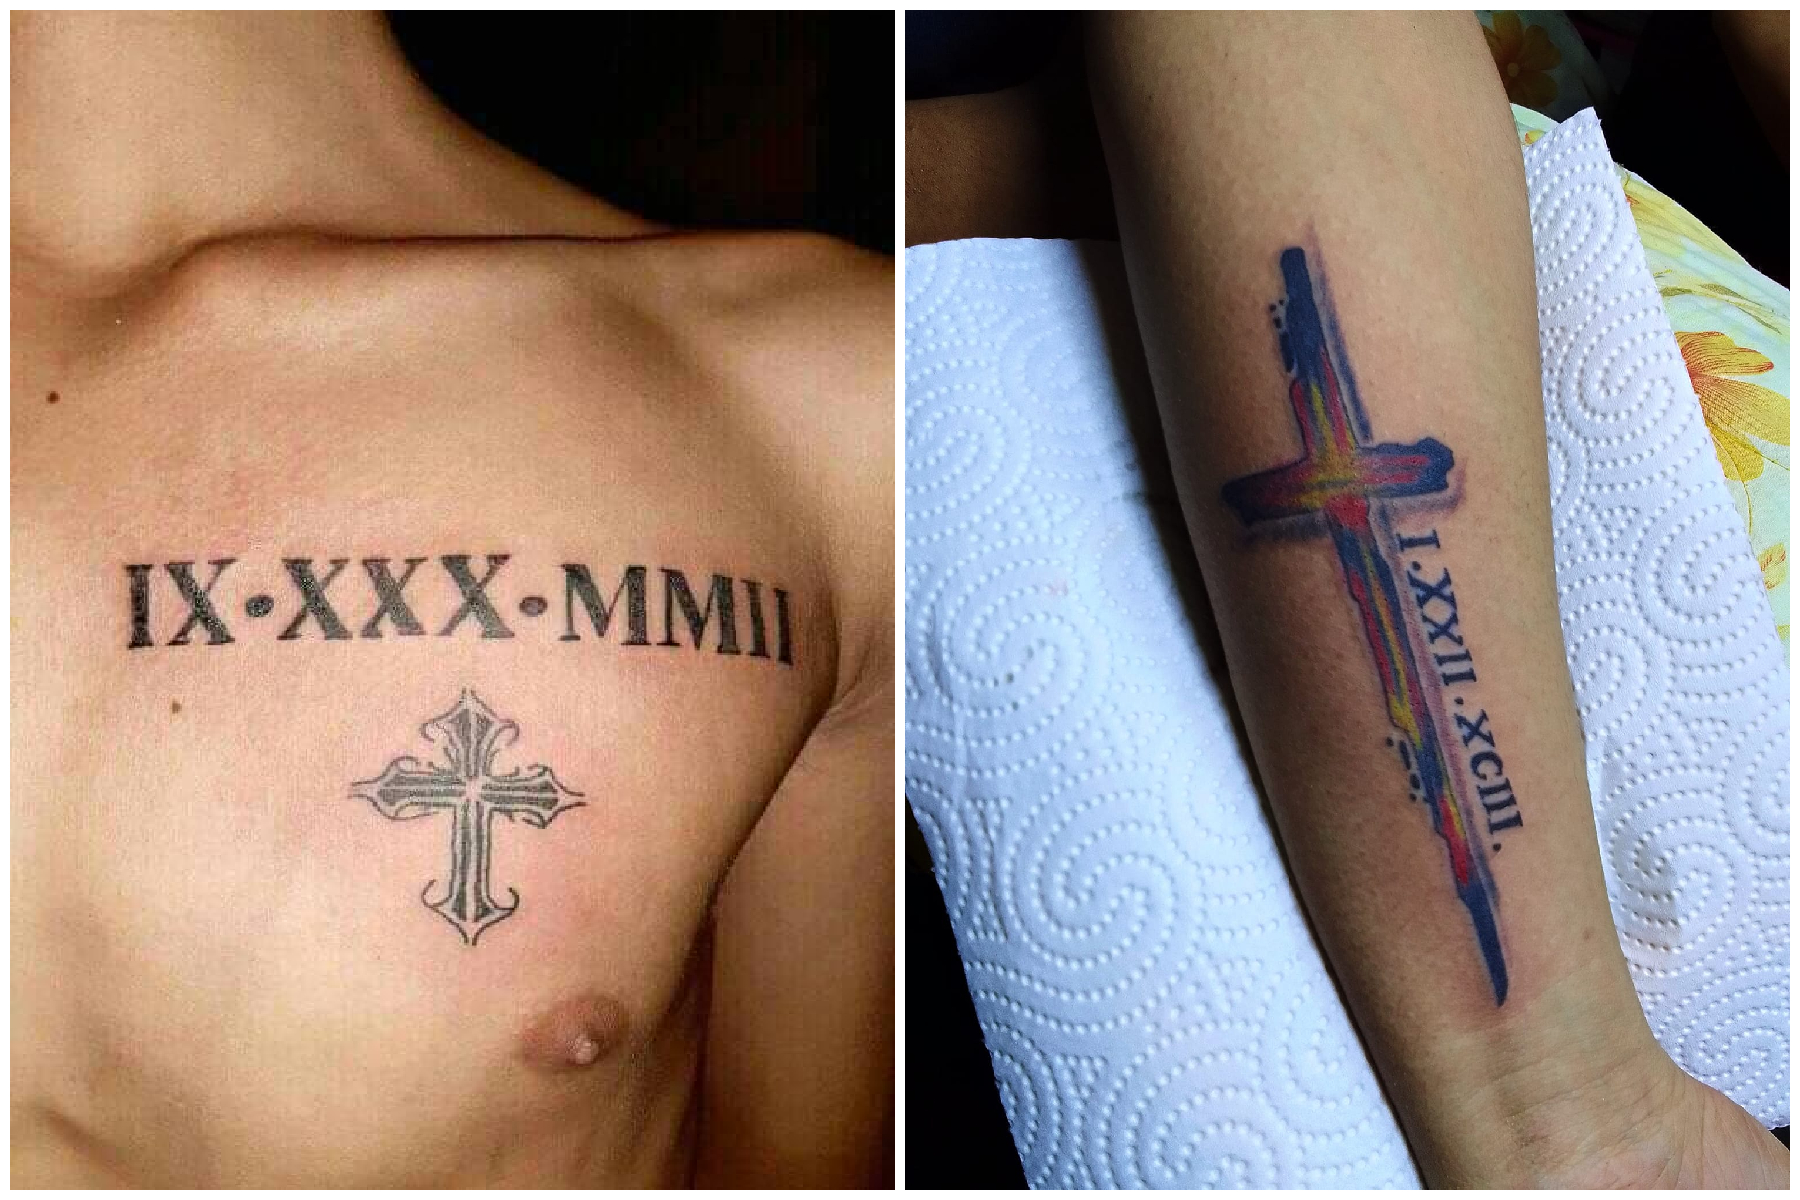 30+ Roman Numerals Tattoo Ideas for Men and Women | Roman numeral tattoos, Roman  numbers tattoo, Tattoos